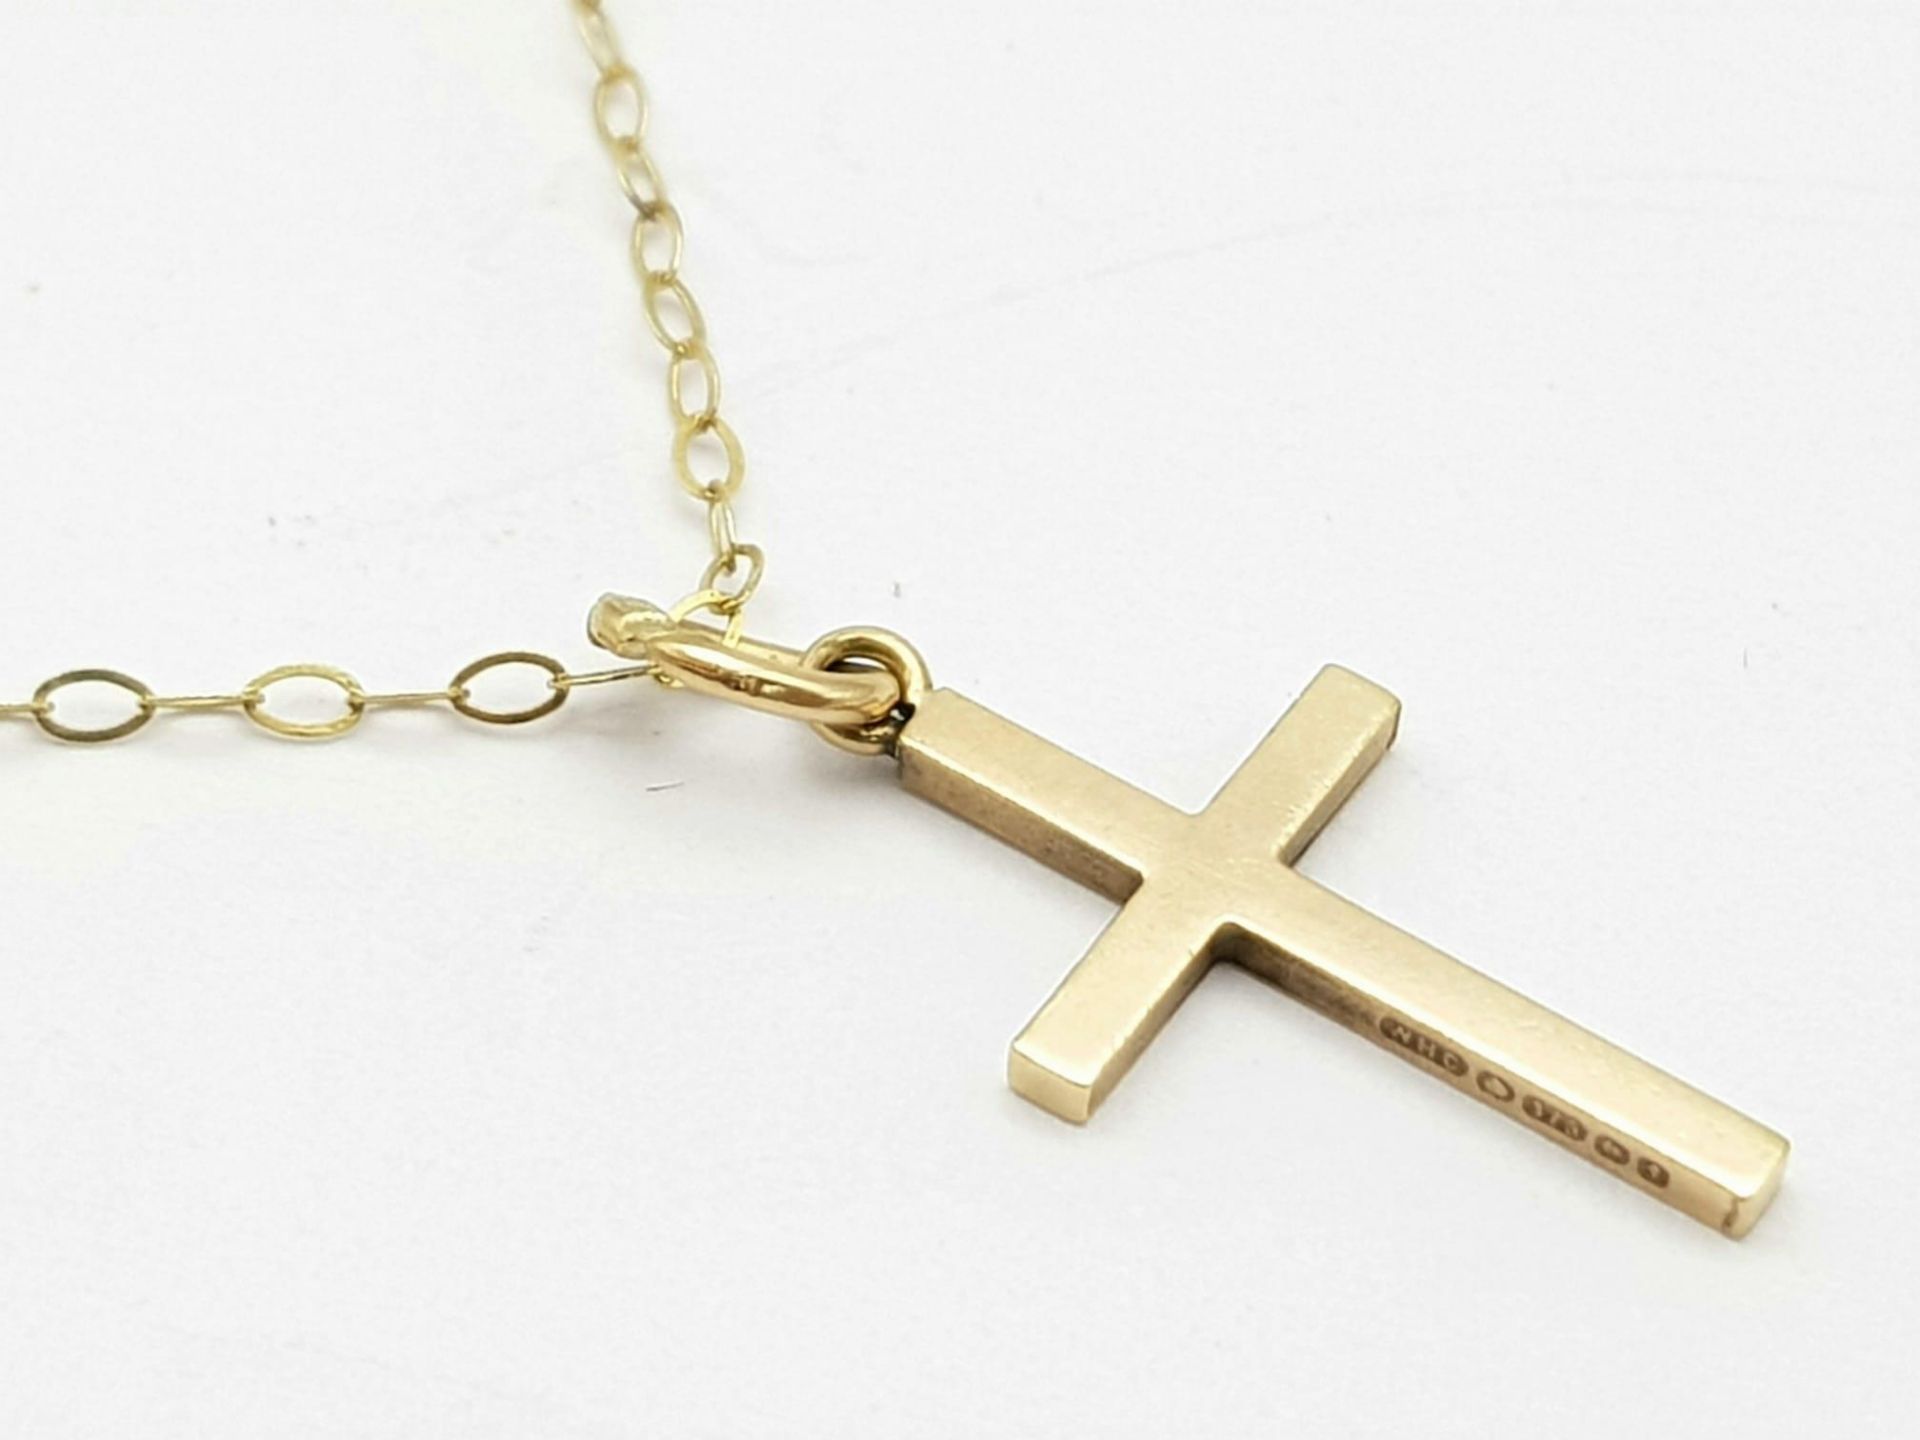 9k yellow gold cross pendant on 16" belcher chain, total weight 0.9g - Image 2 of 5